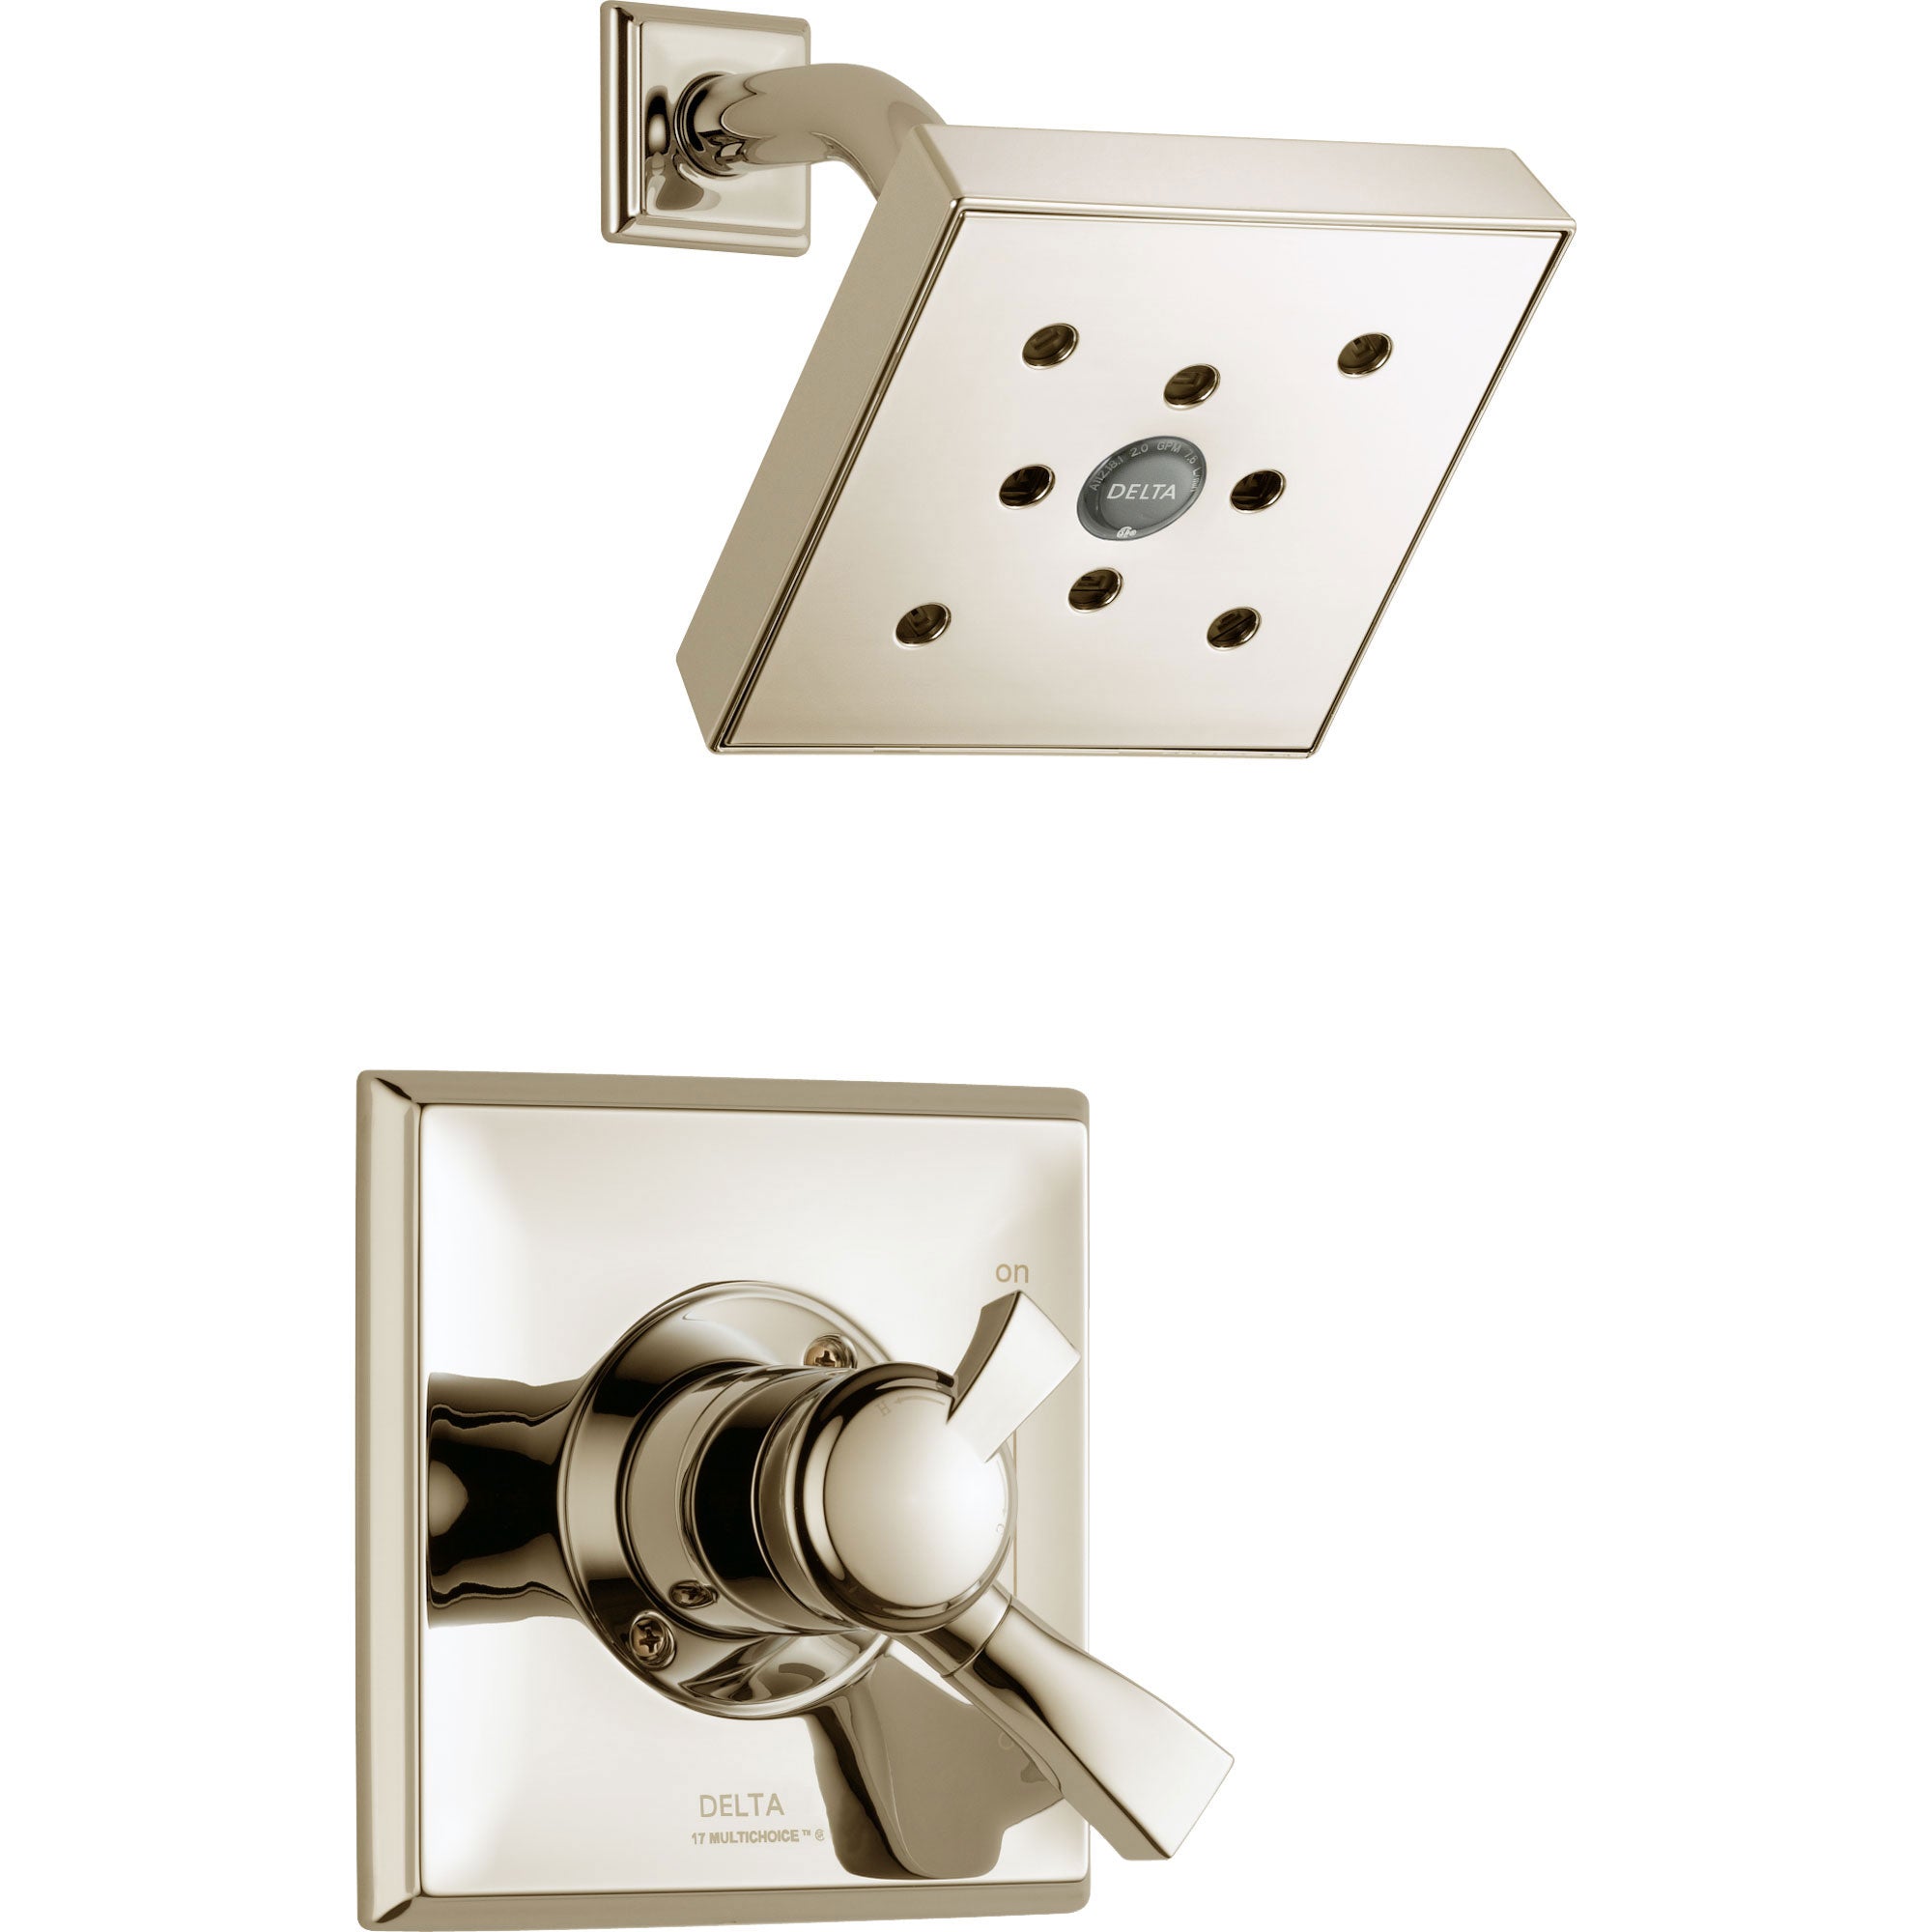 Delta Dryden Modern H2Okinetic Polished Nickel Finish Shower Only Faucet with Dual Temperature and Pressure Control INCLUDES Rough-in Valve with Stops D1145V